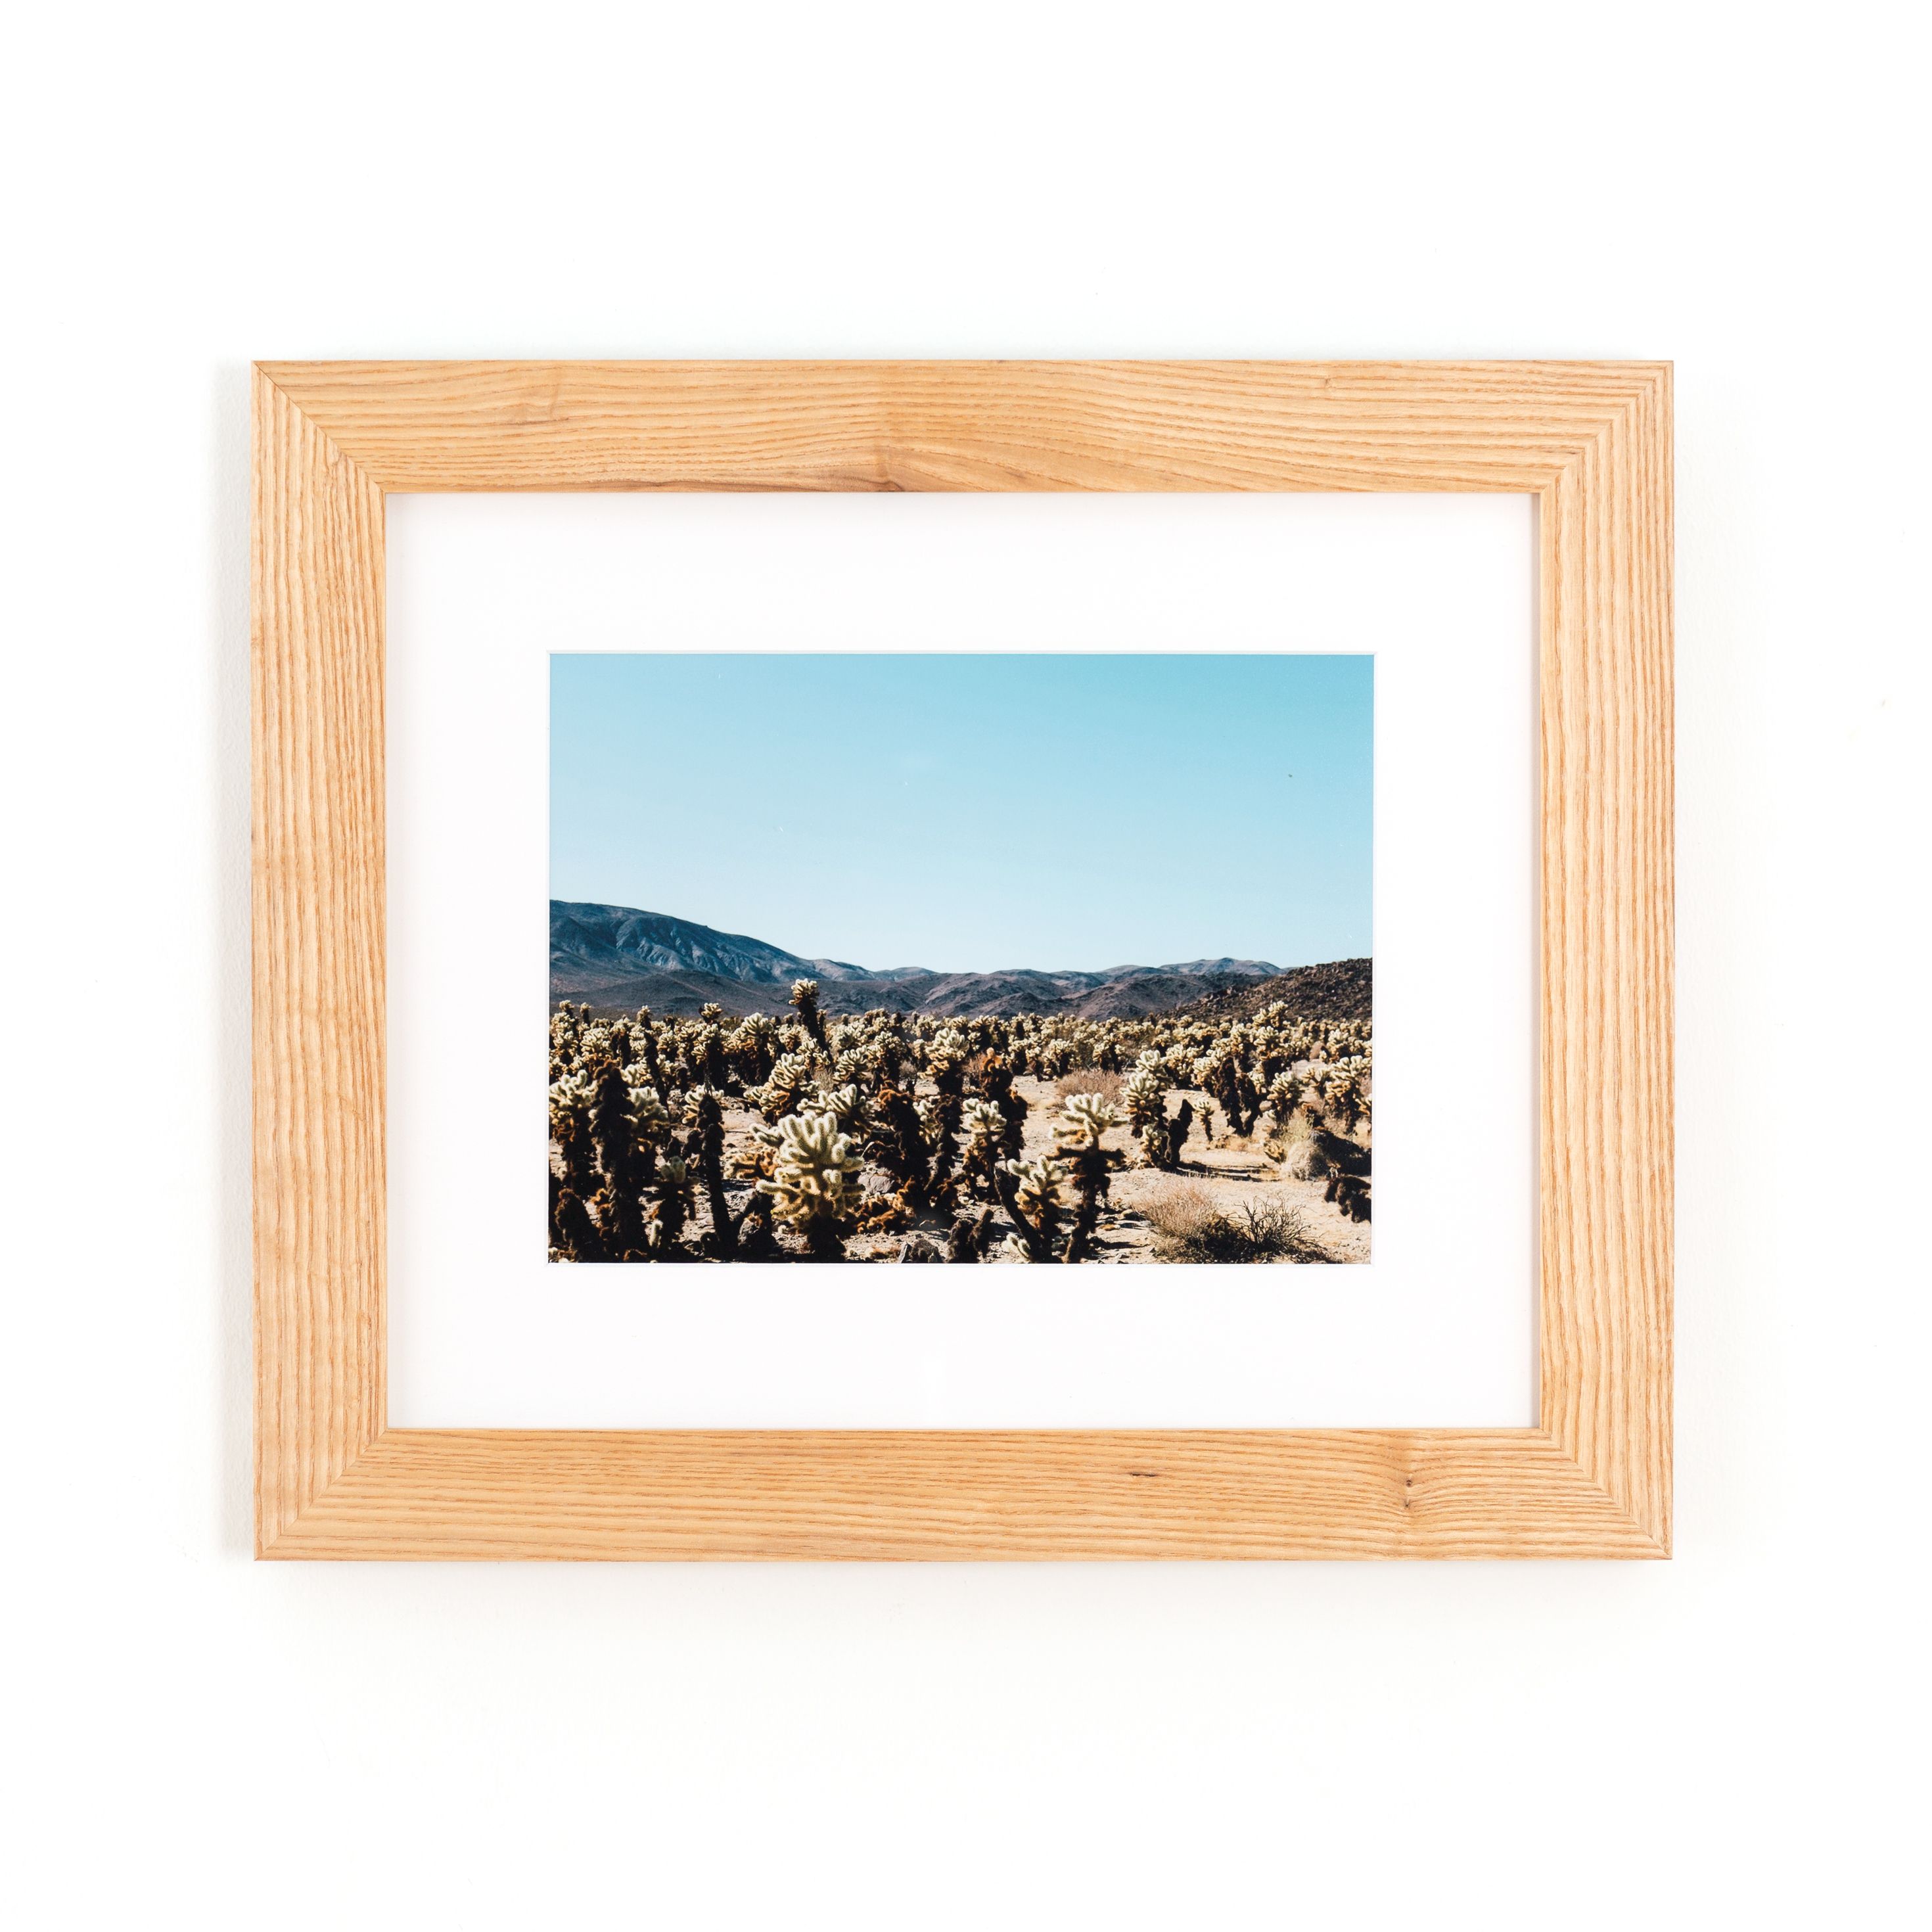 UPDATED AND REVISED PRICING 5"x7" Wood picture frame with mat 